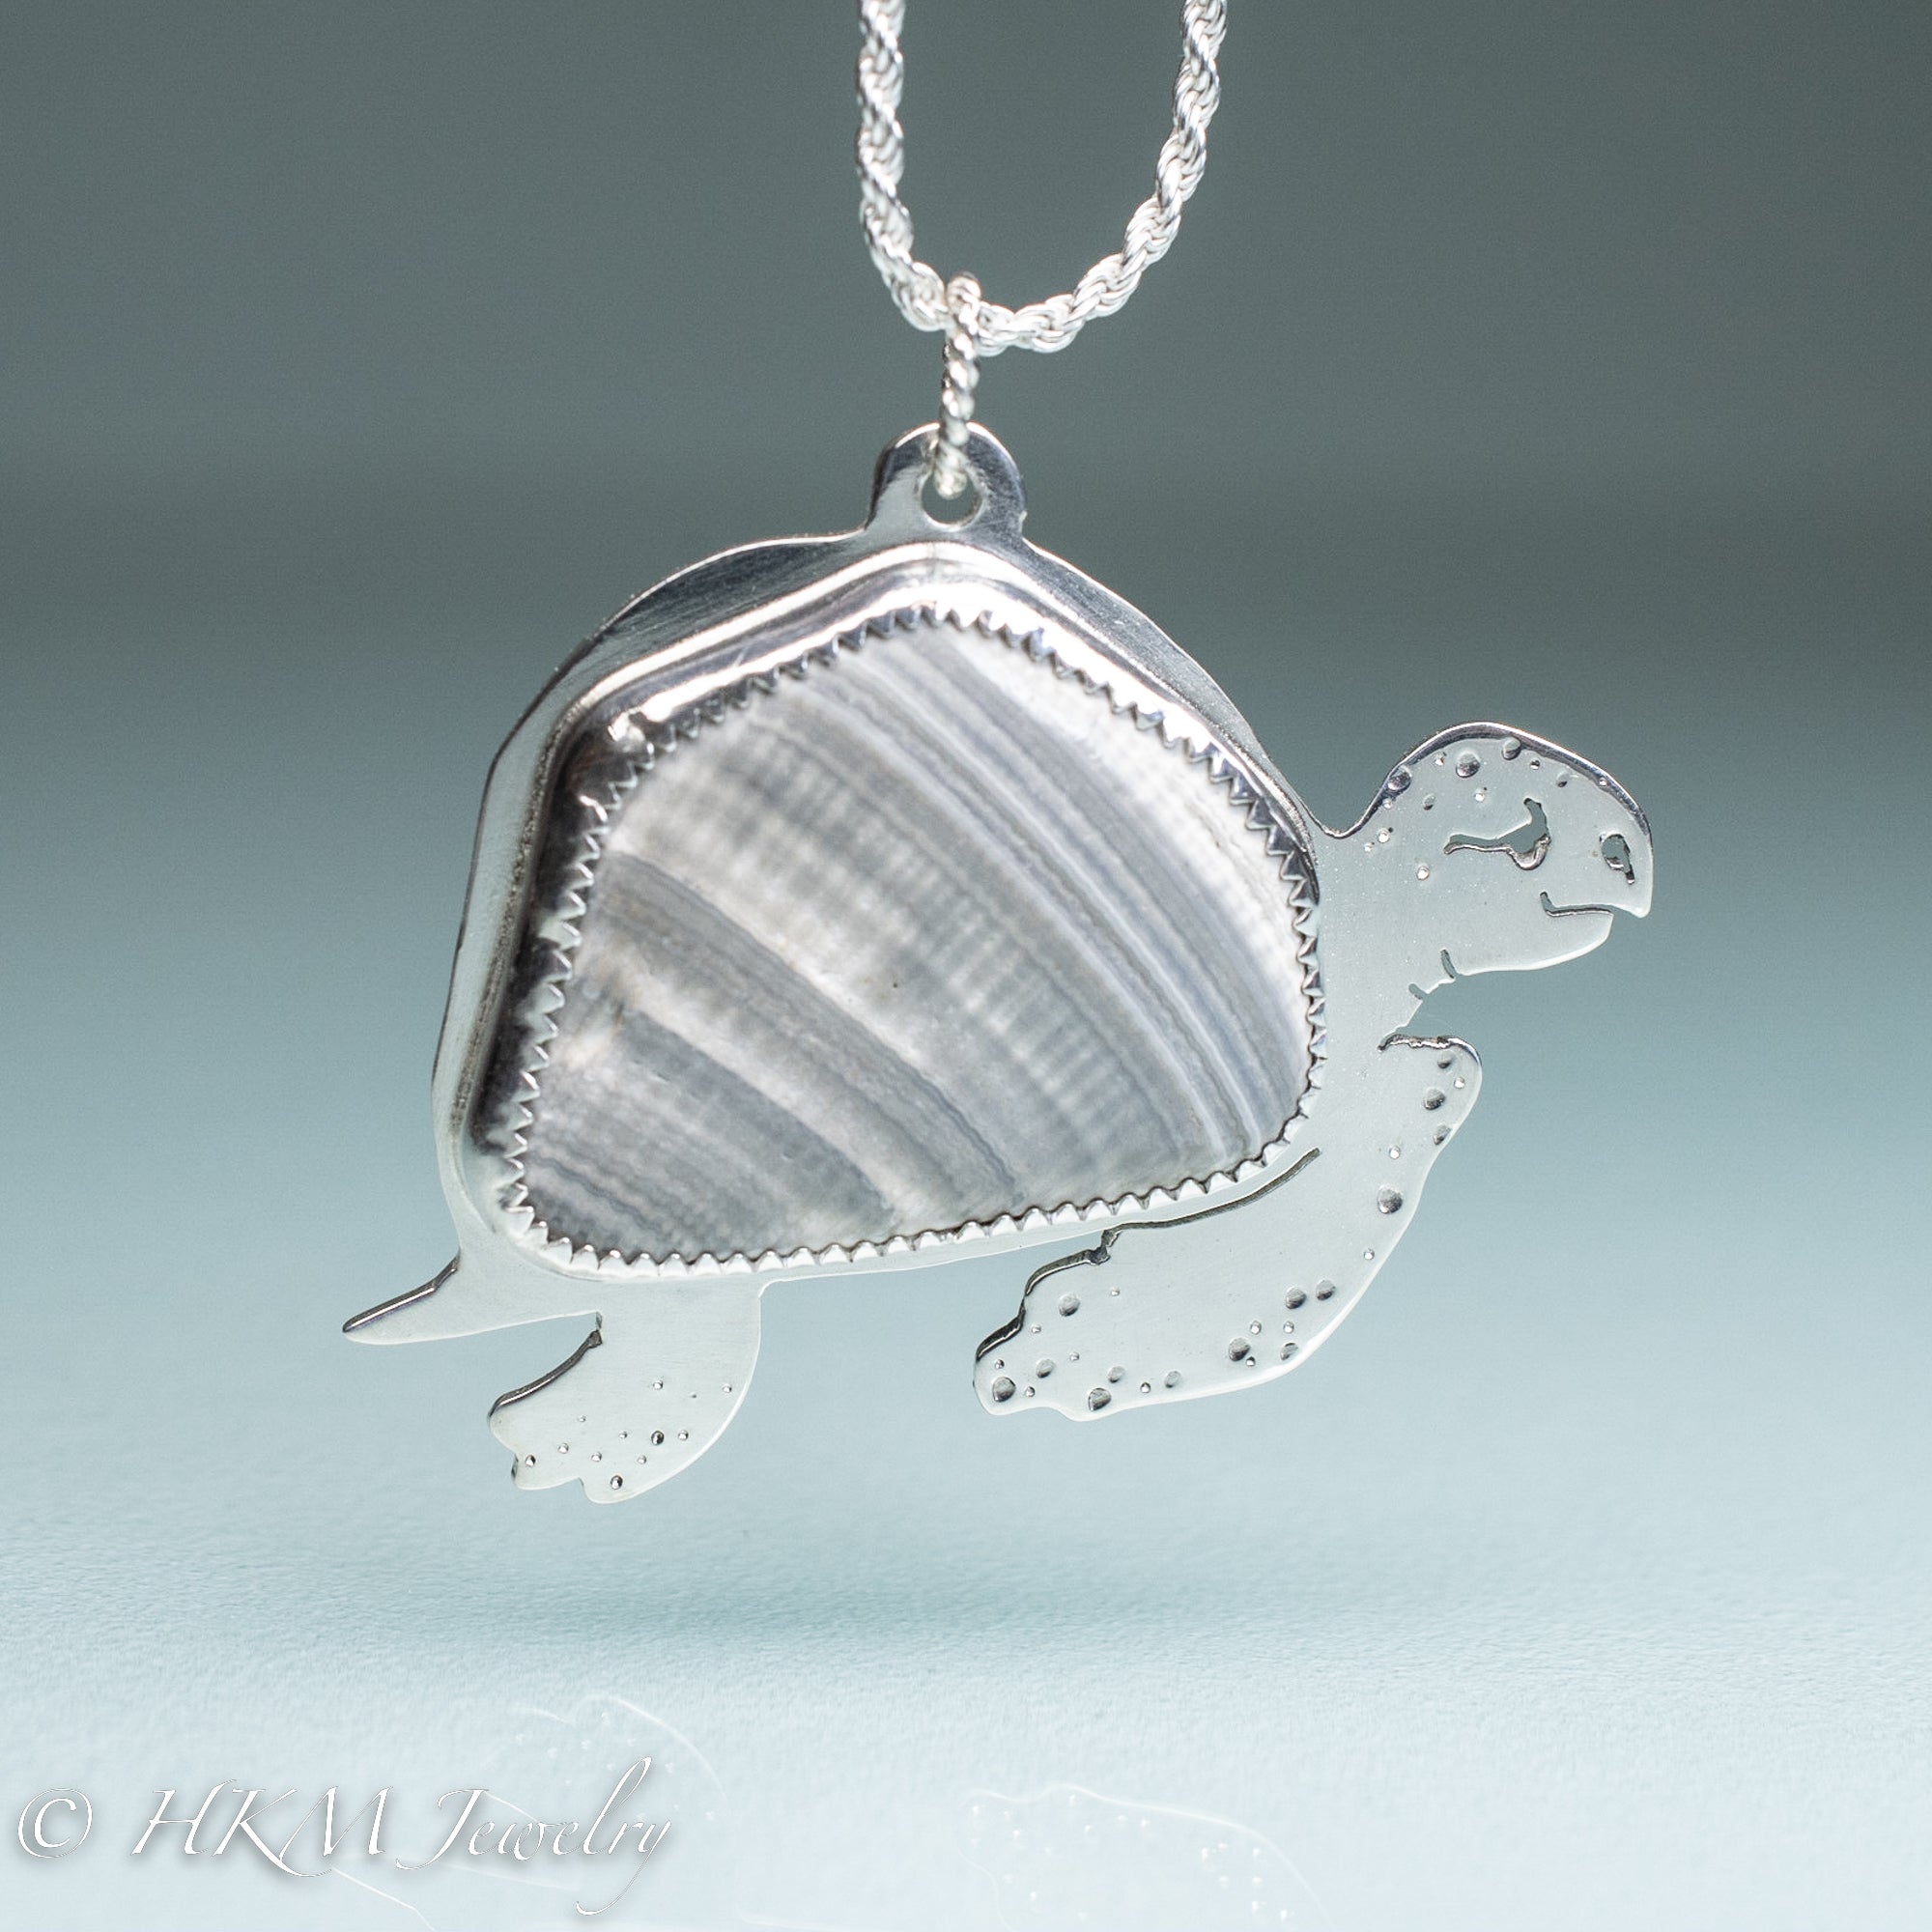 GIVA 925 Sterling Silver Turtle Pendant with Link Chain | Valentines Gifts  for Girlfriend, Gifts for Women and Girls |With Certificate of Authenticity  and 925 Stamp | 6 Month Warranty* : Amazon.in: Fashion